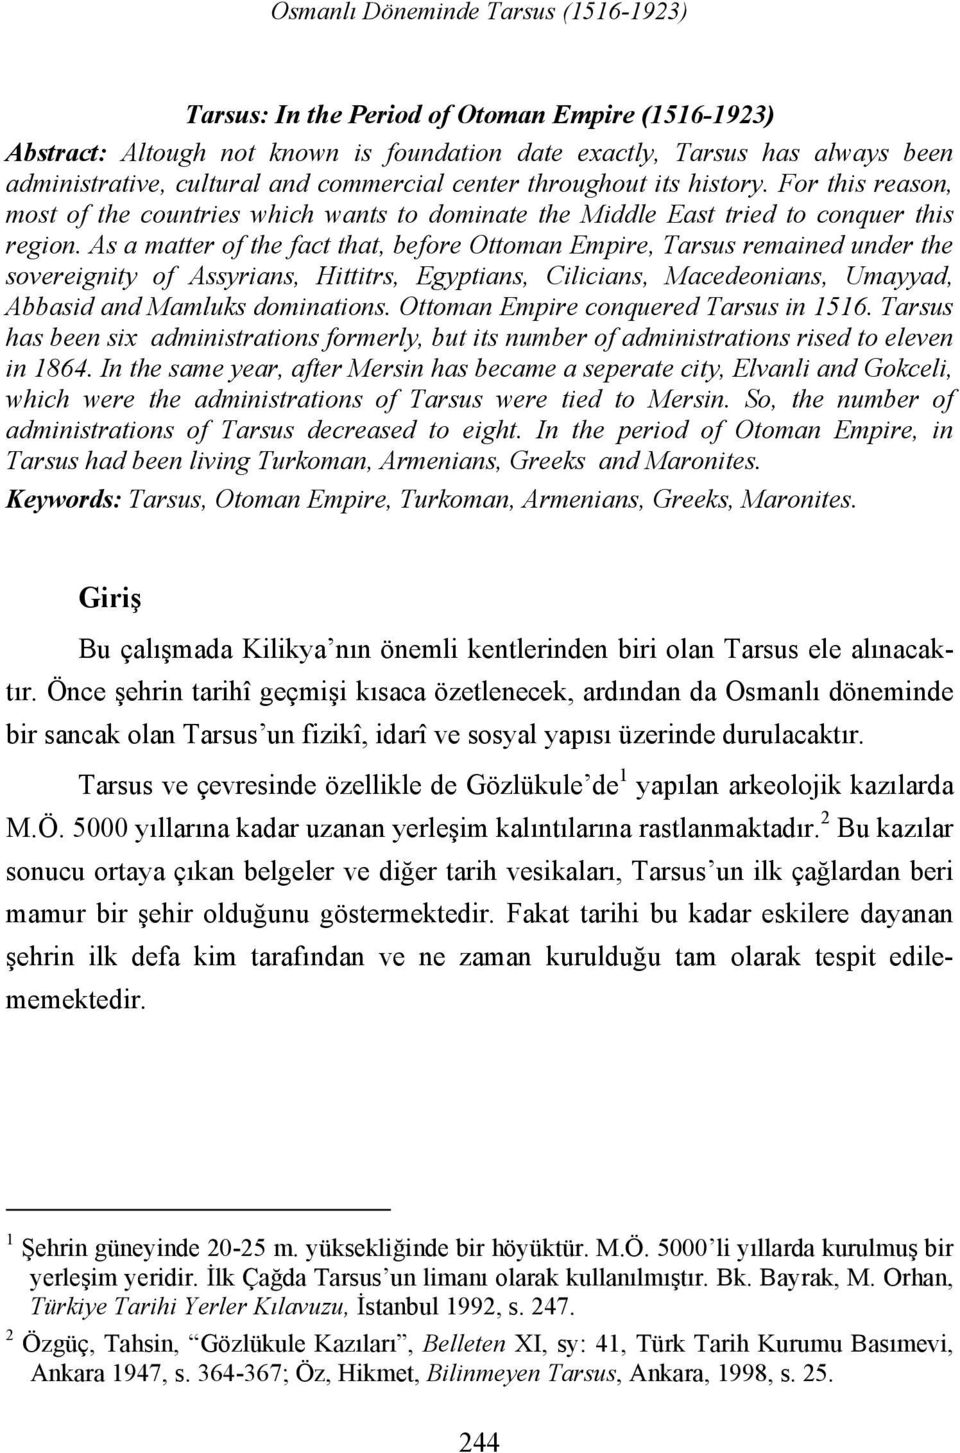 As a matter of the fact that, before Ottoman Empire, Tarsus remained under the sovereignity of Assyrians, Hittitrs, Egyptians, Cilicians, Macedeonians, Umayyad, Abbasid and Mamluks dominations.